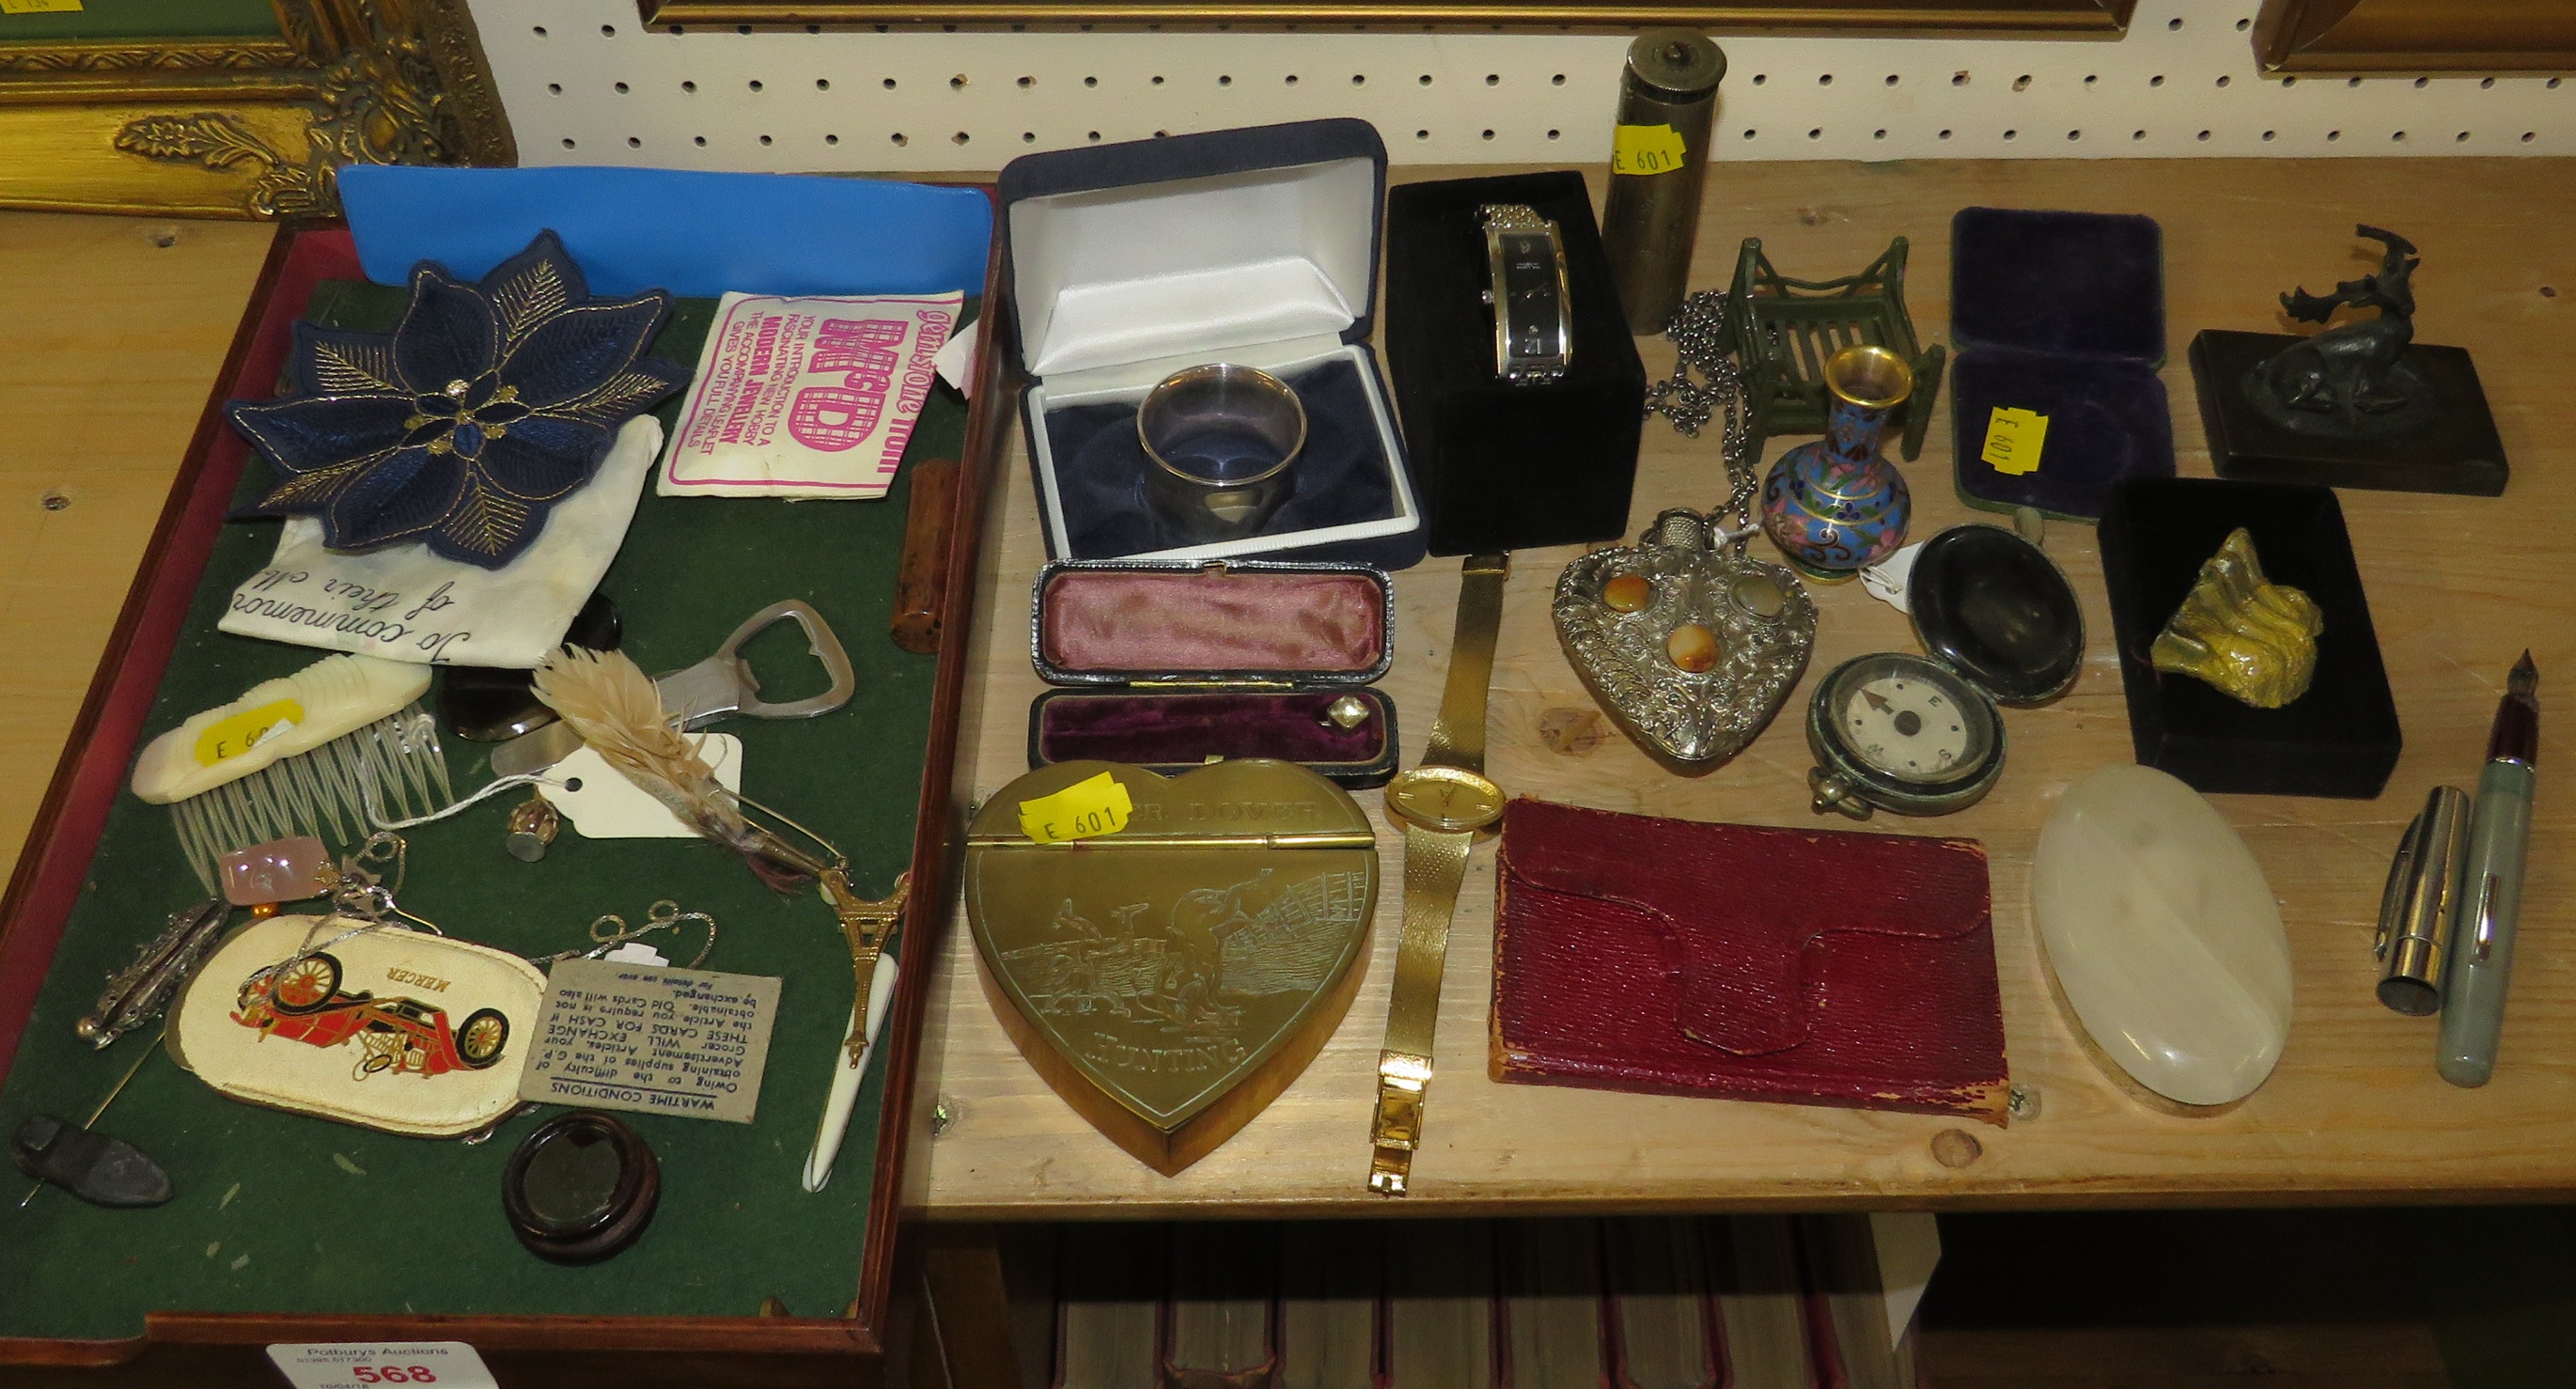 TWO WRISTWATCHES, COMPASS, STICK PIN AND OTHER SMALL ITEMS (CONTENTS OF A WOODEN TRAY)